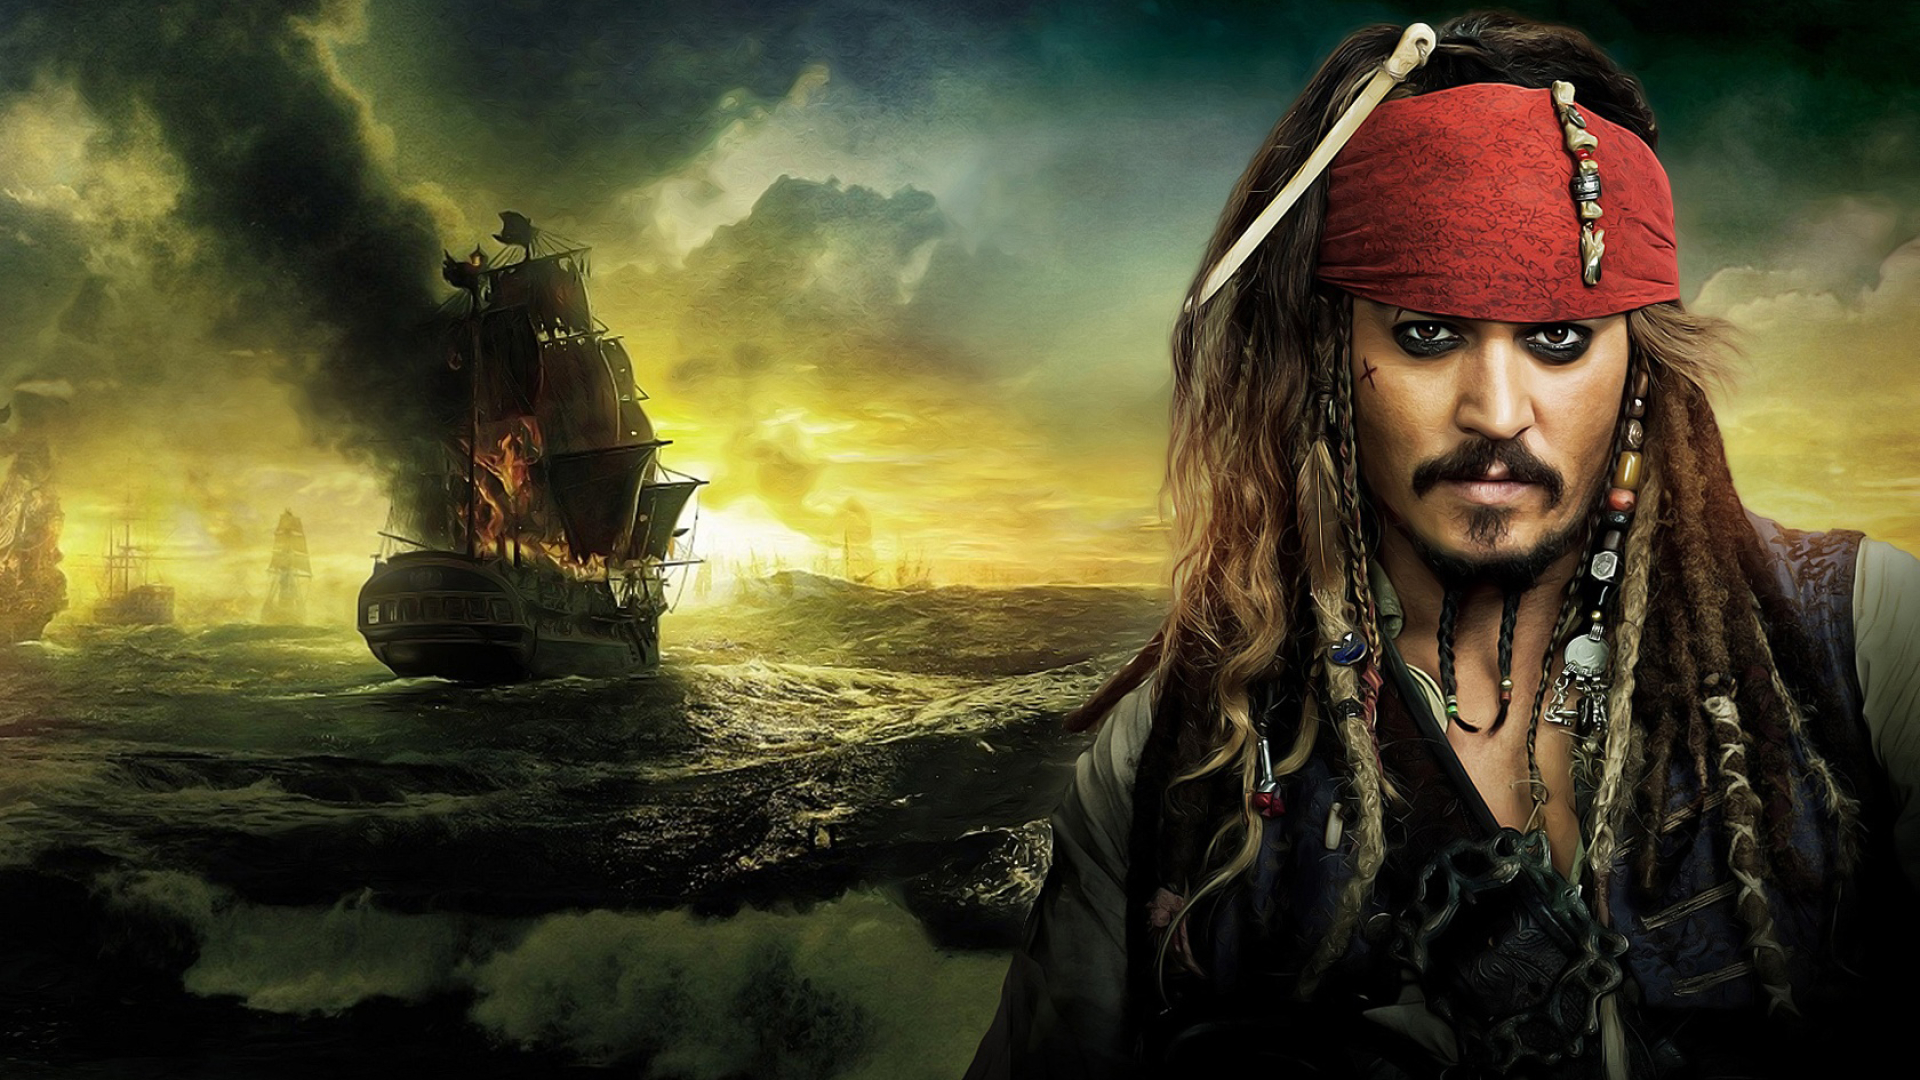 for mac download Pirates of the Caribbean